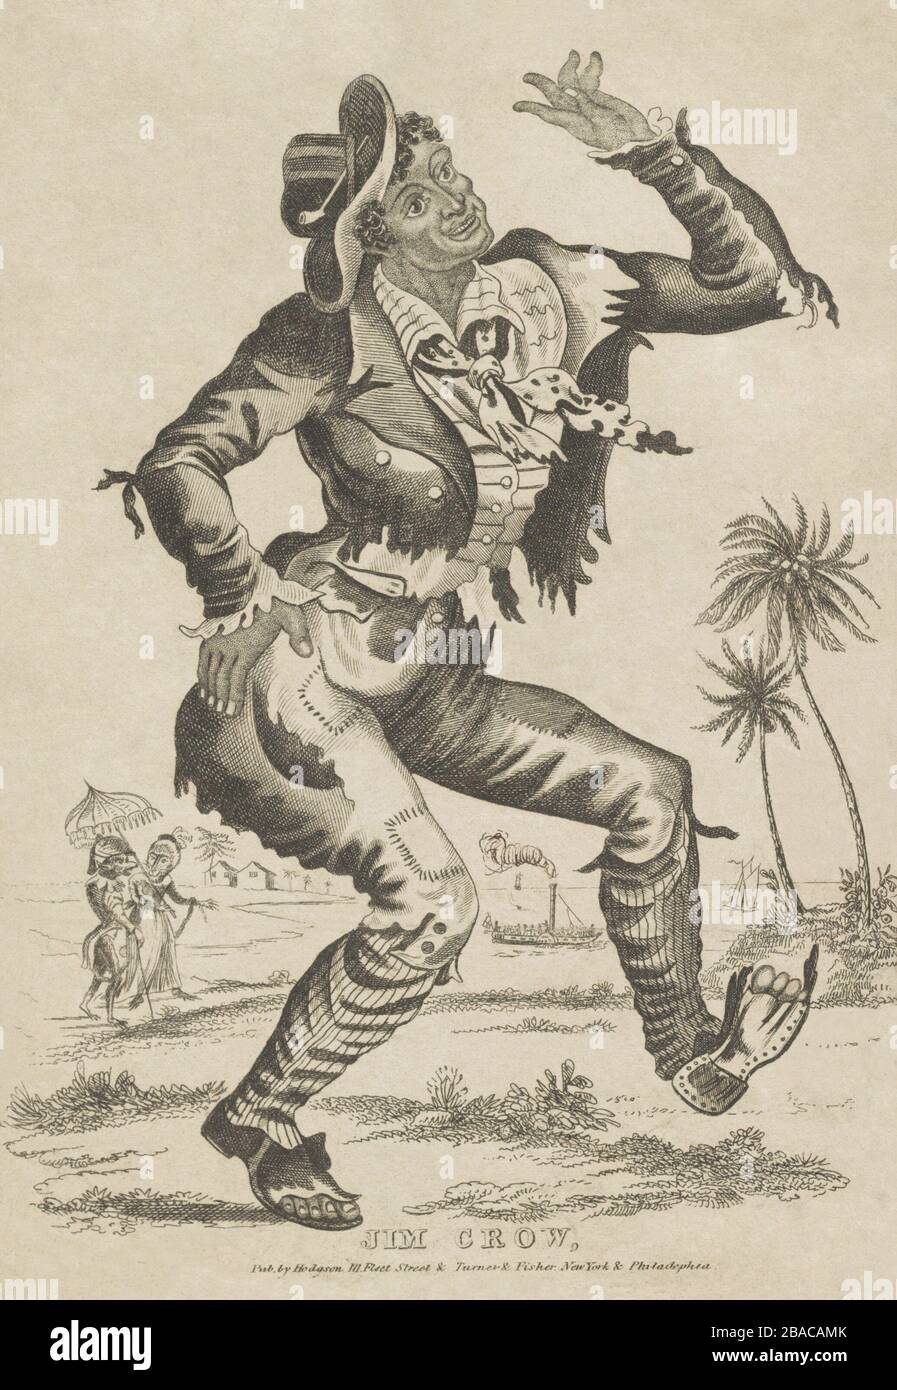 African American identified as Jim Crow, the dancing character of Thomas D. Rice. He wears tattered clothes, is doing a dancing walk. In the background a couple of animals dressed as humans, walk on their hind legs along a river with a steamboat and sailboat  (BSLOC 2019 6 33) Stock Photo